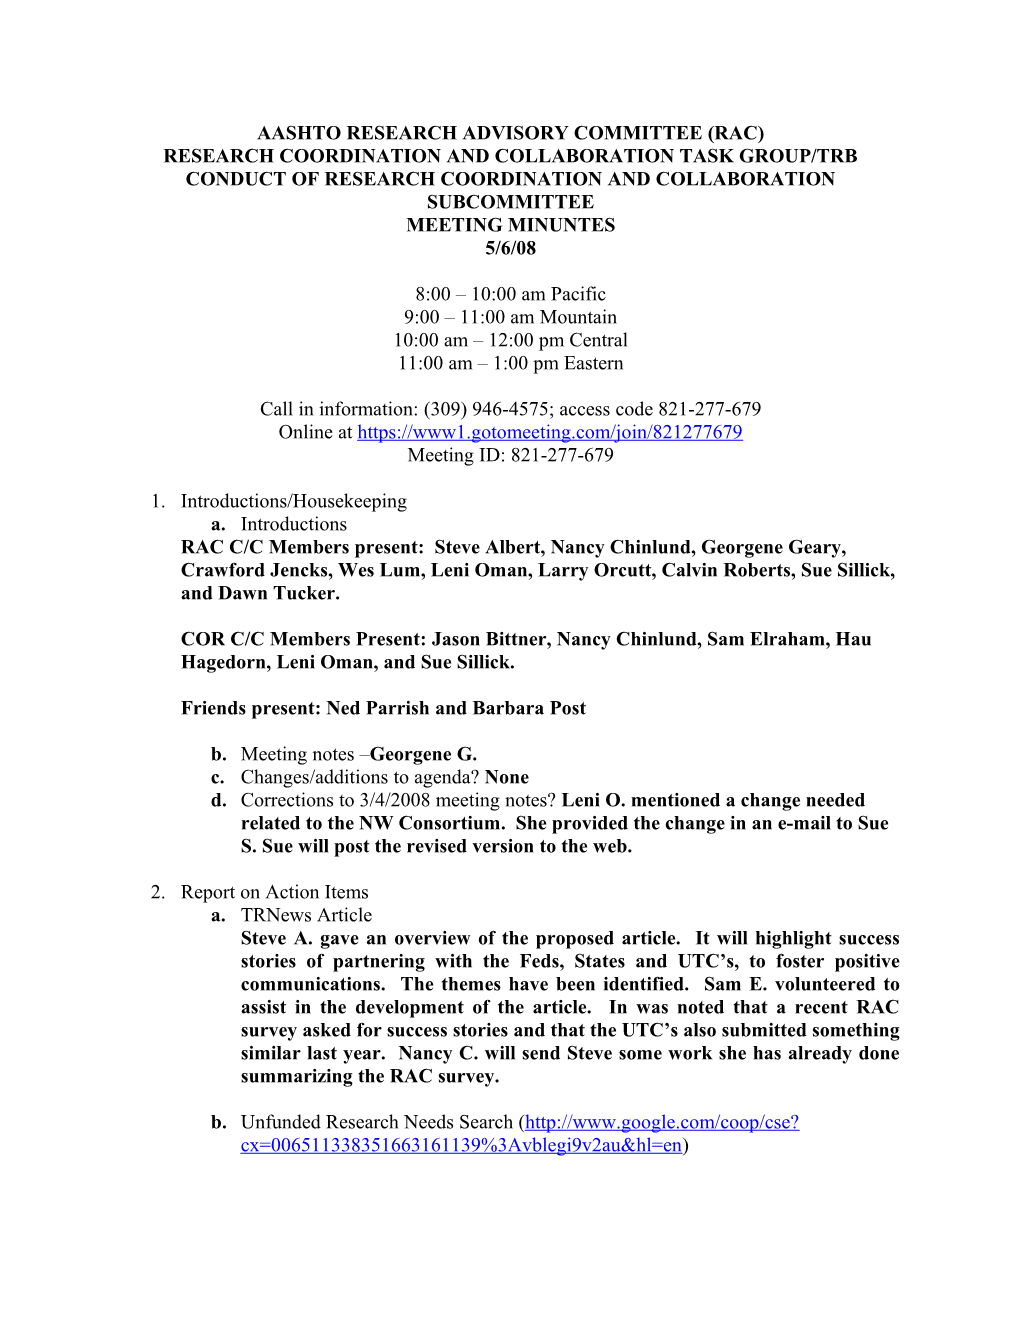 Research Coordination and Collaboration Meeting Notes: May 6, 2008